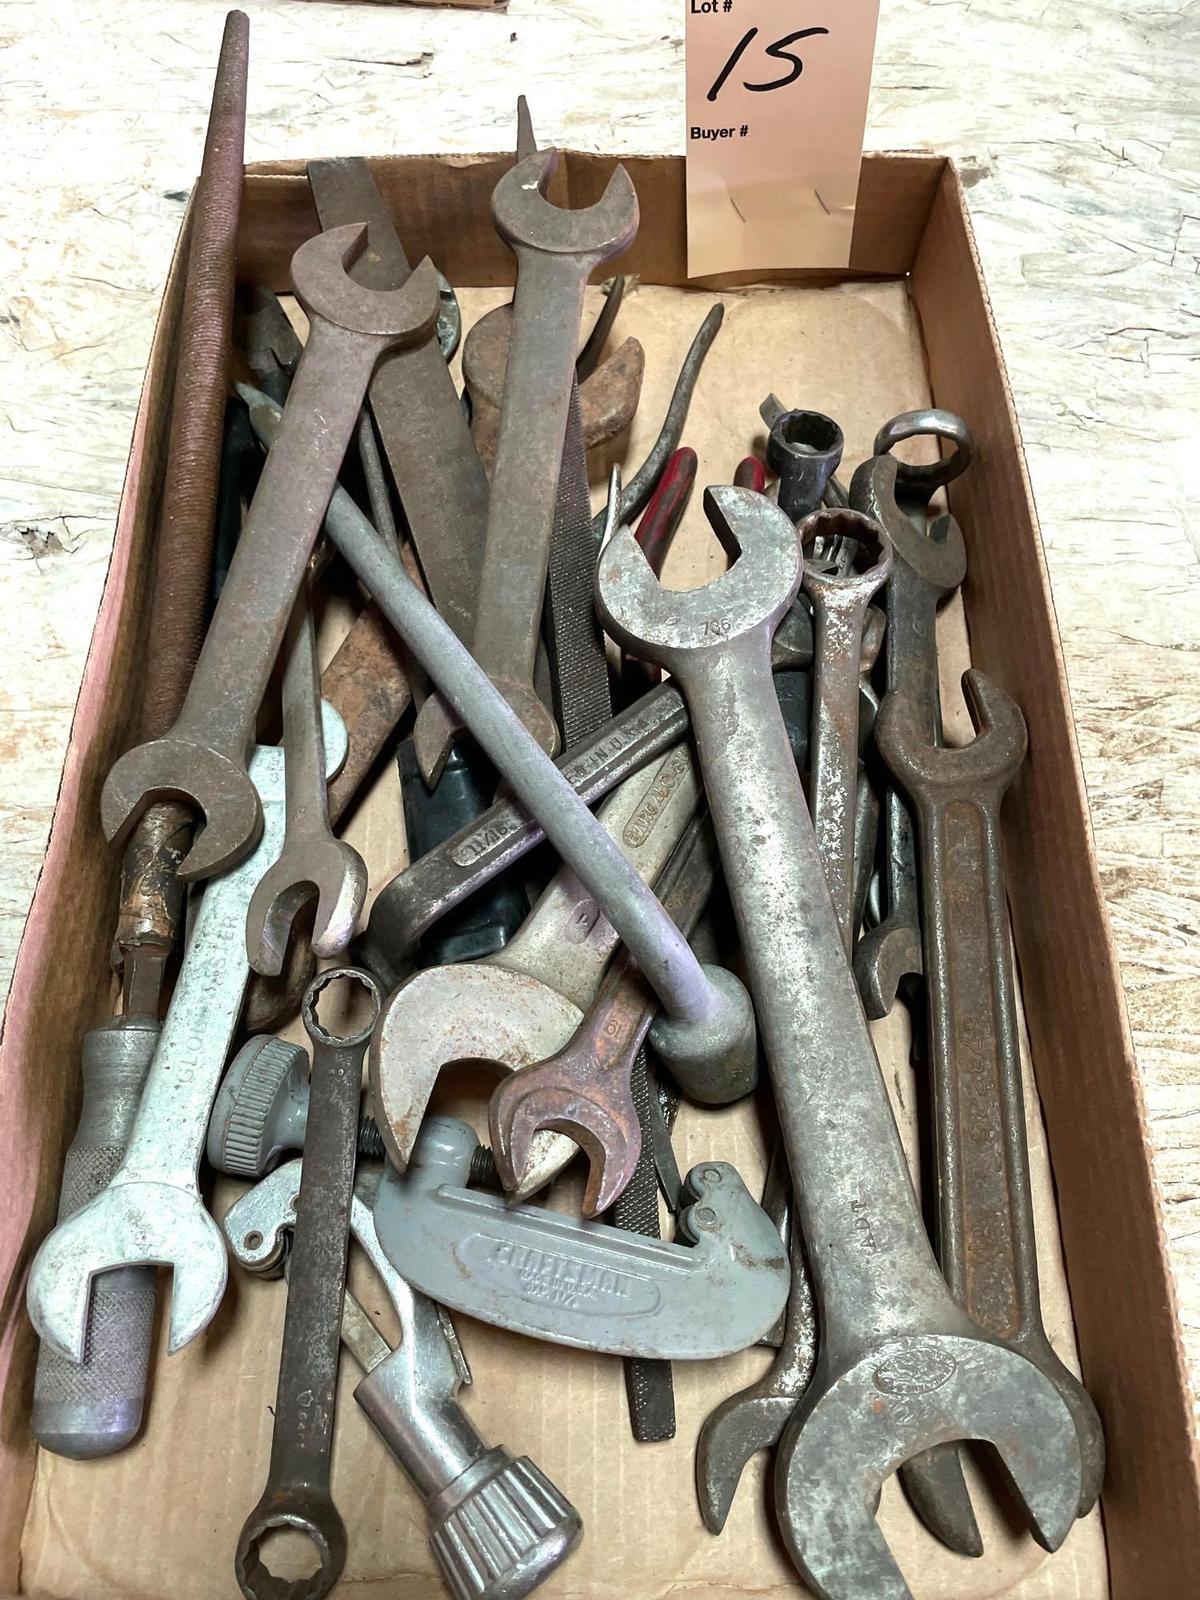 Box end and open end wrenches, copper tubing cutter, etc